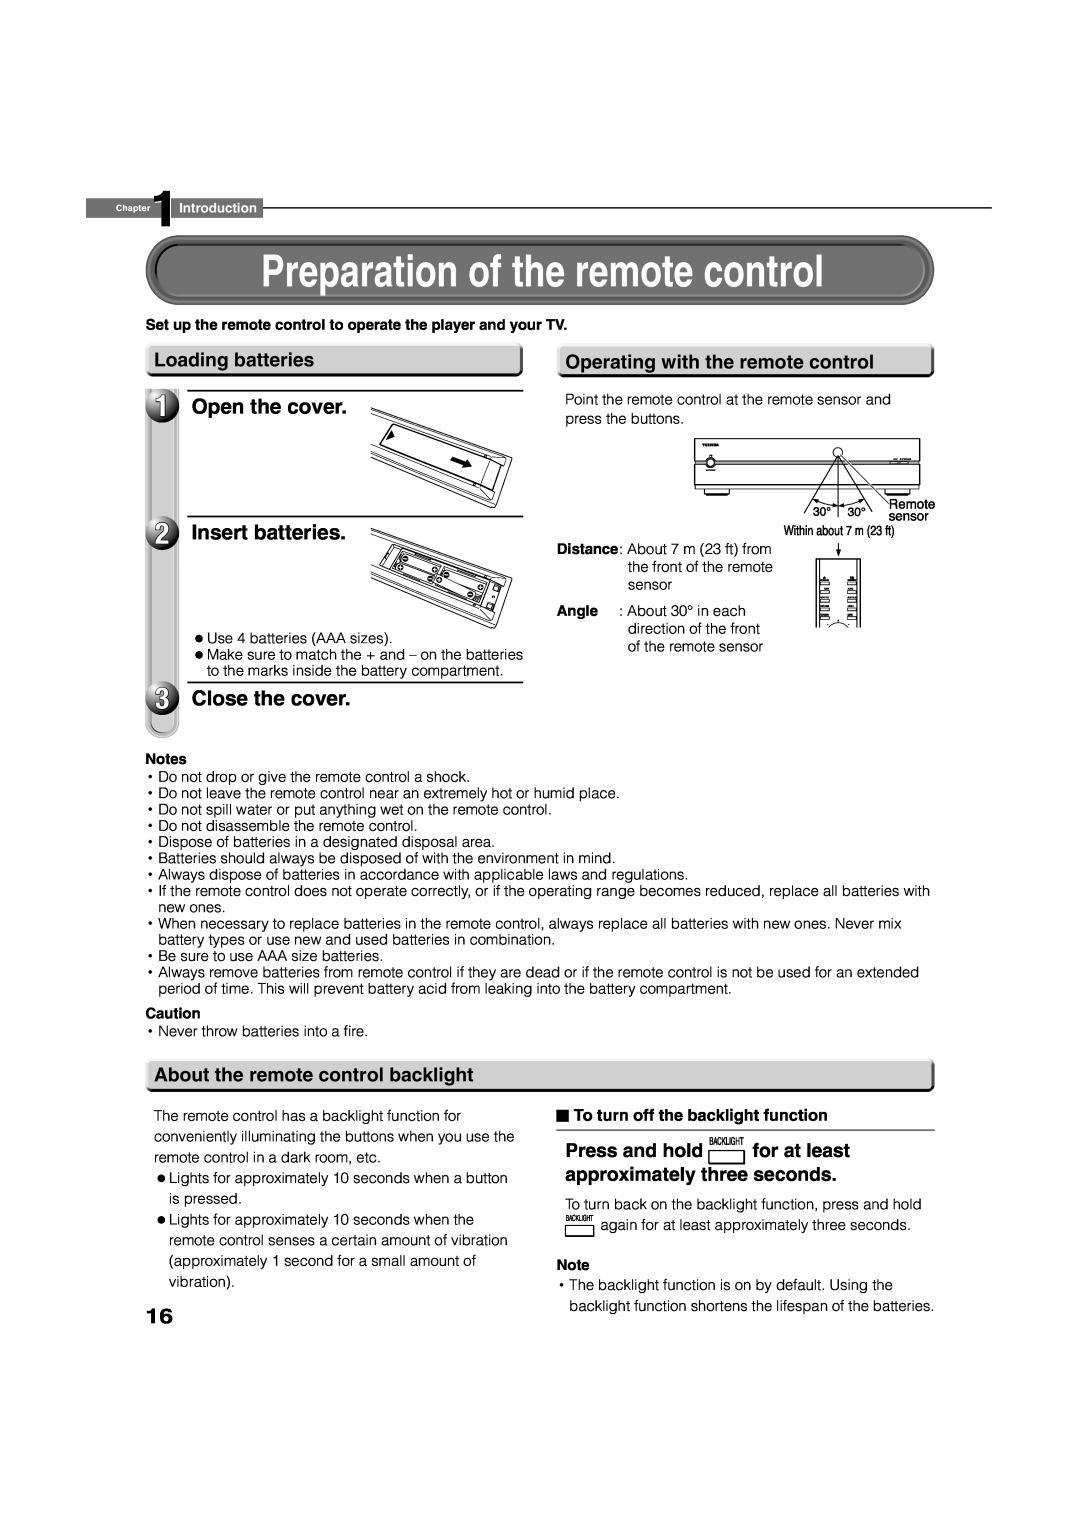 Toshiba HD-XA1 Preparation of the remote control, Open the cover 2 Insert batteries, Close the cover, Loading batteries 